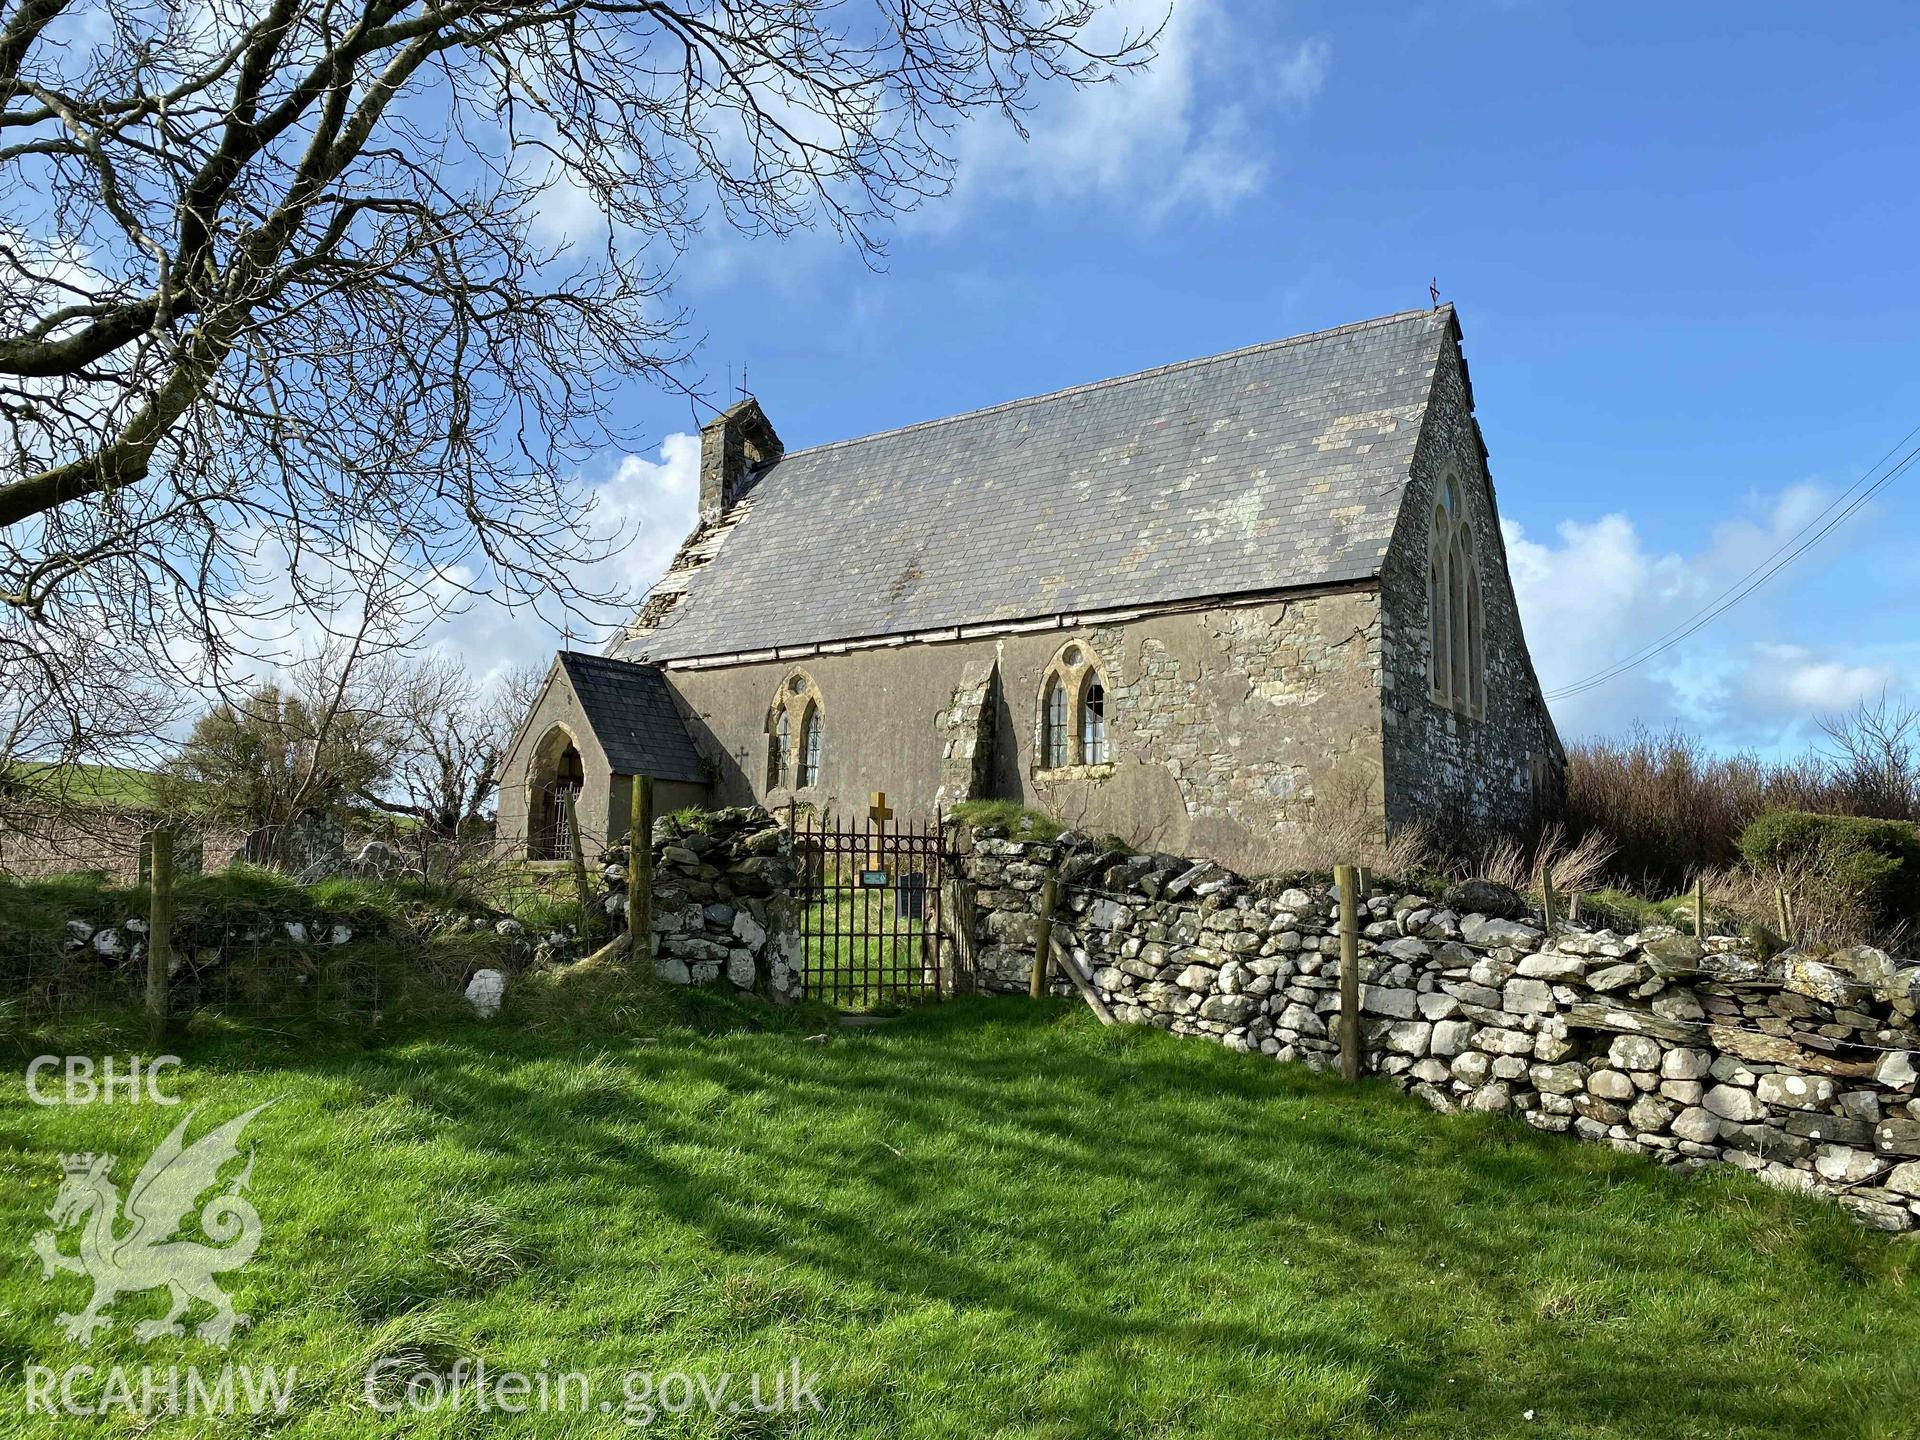 Digital photograph of approach to St David's Church, Llanllawer, produced by Paul Davis in 2020